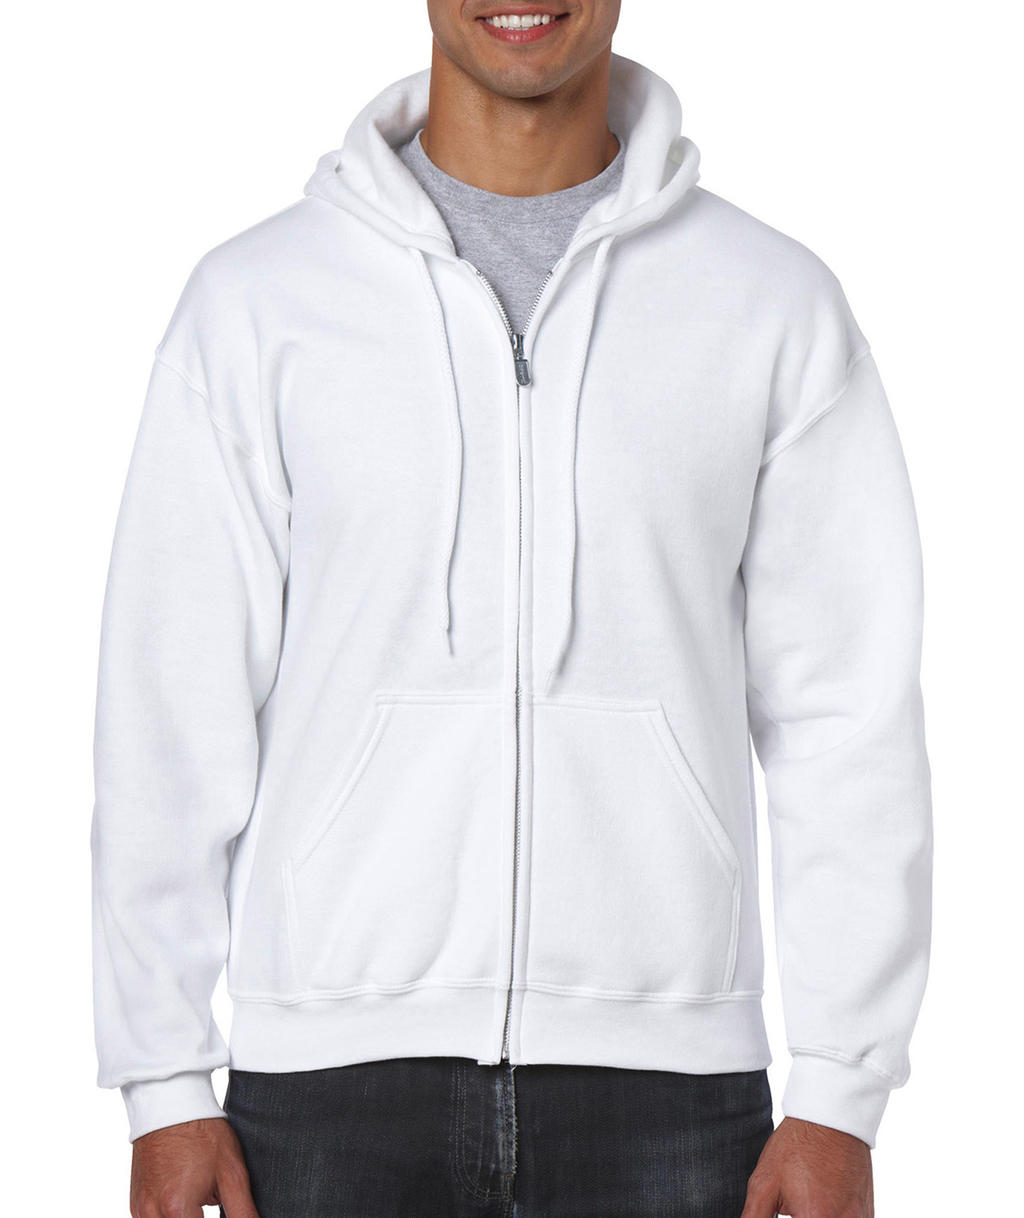  Heavy Blend Adult Full Zip Hooded Sweat in Farbe White